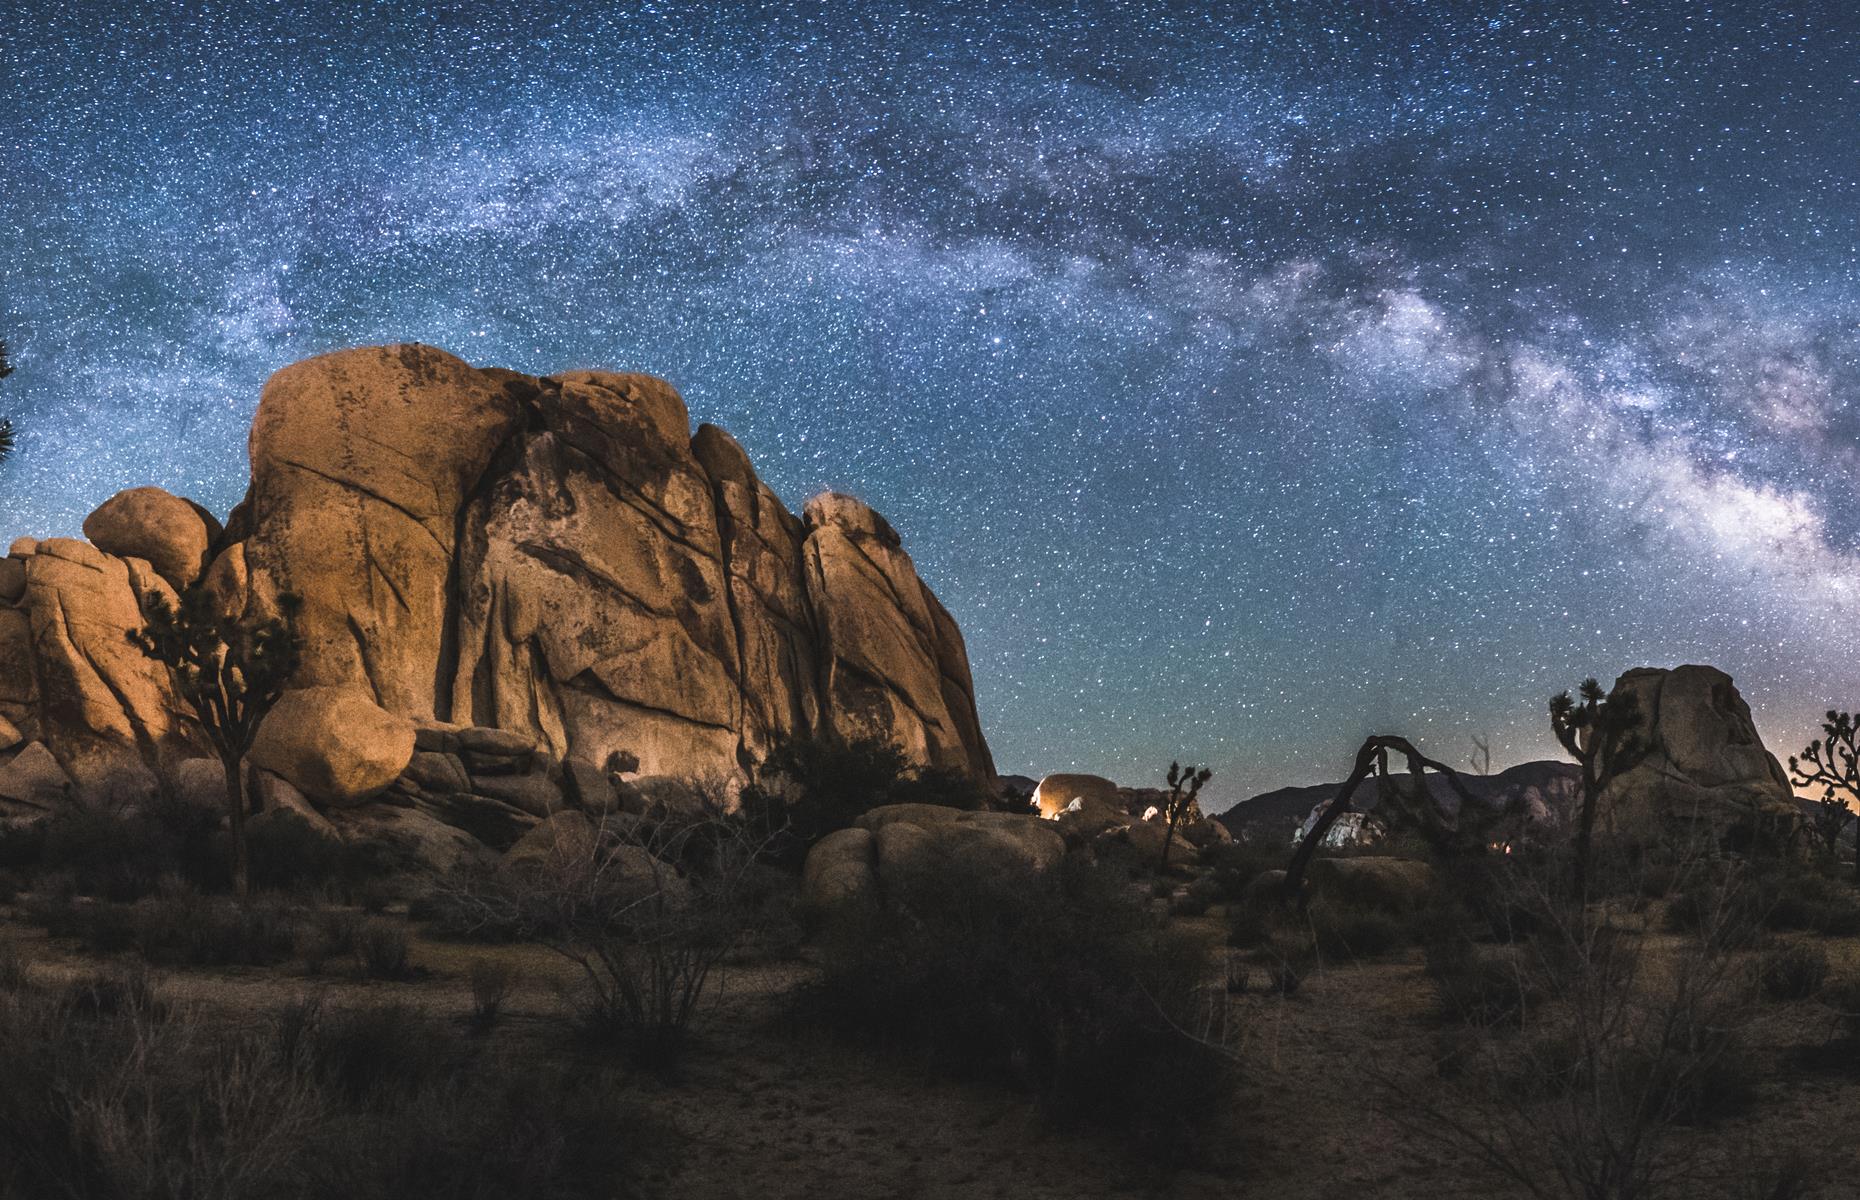 <p>Photographers flock to Joshua Tree National Park for its night skies thick with stars and ethereal views of the Milky Way. The Flintstone-style boulders and spindly, spiky Joshua trees that stud the park add to its surreal beauty. Camp overnight and gaze up at the twinkly blanket or follow the park’s tips for the <a href="https://www.nps.gov/jotr/planyourvisit/stargazing.htm">best stargazing spots</a>.</p>